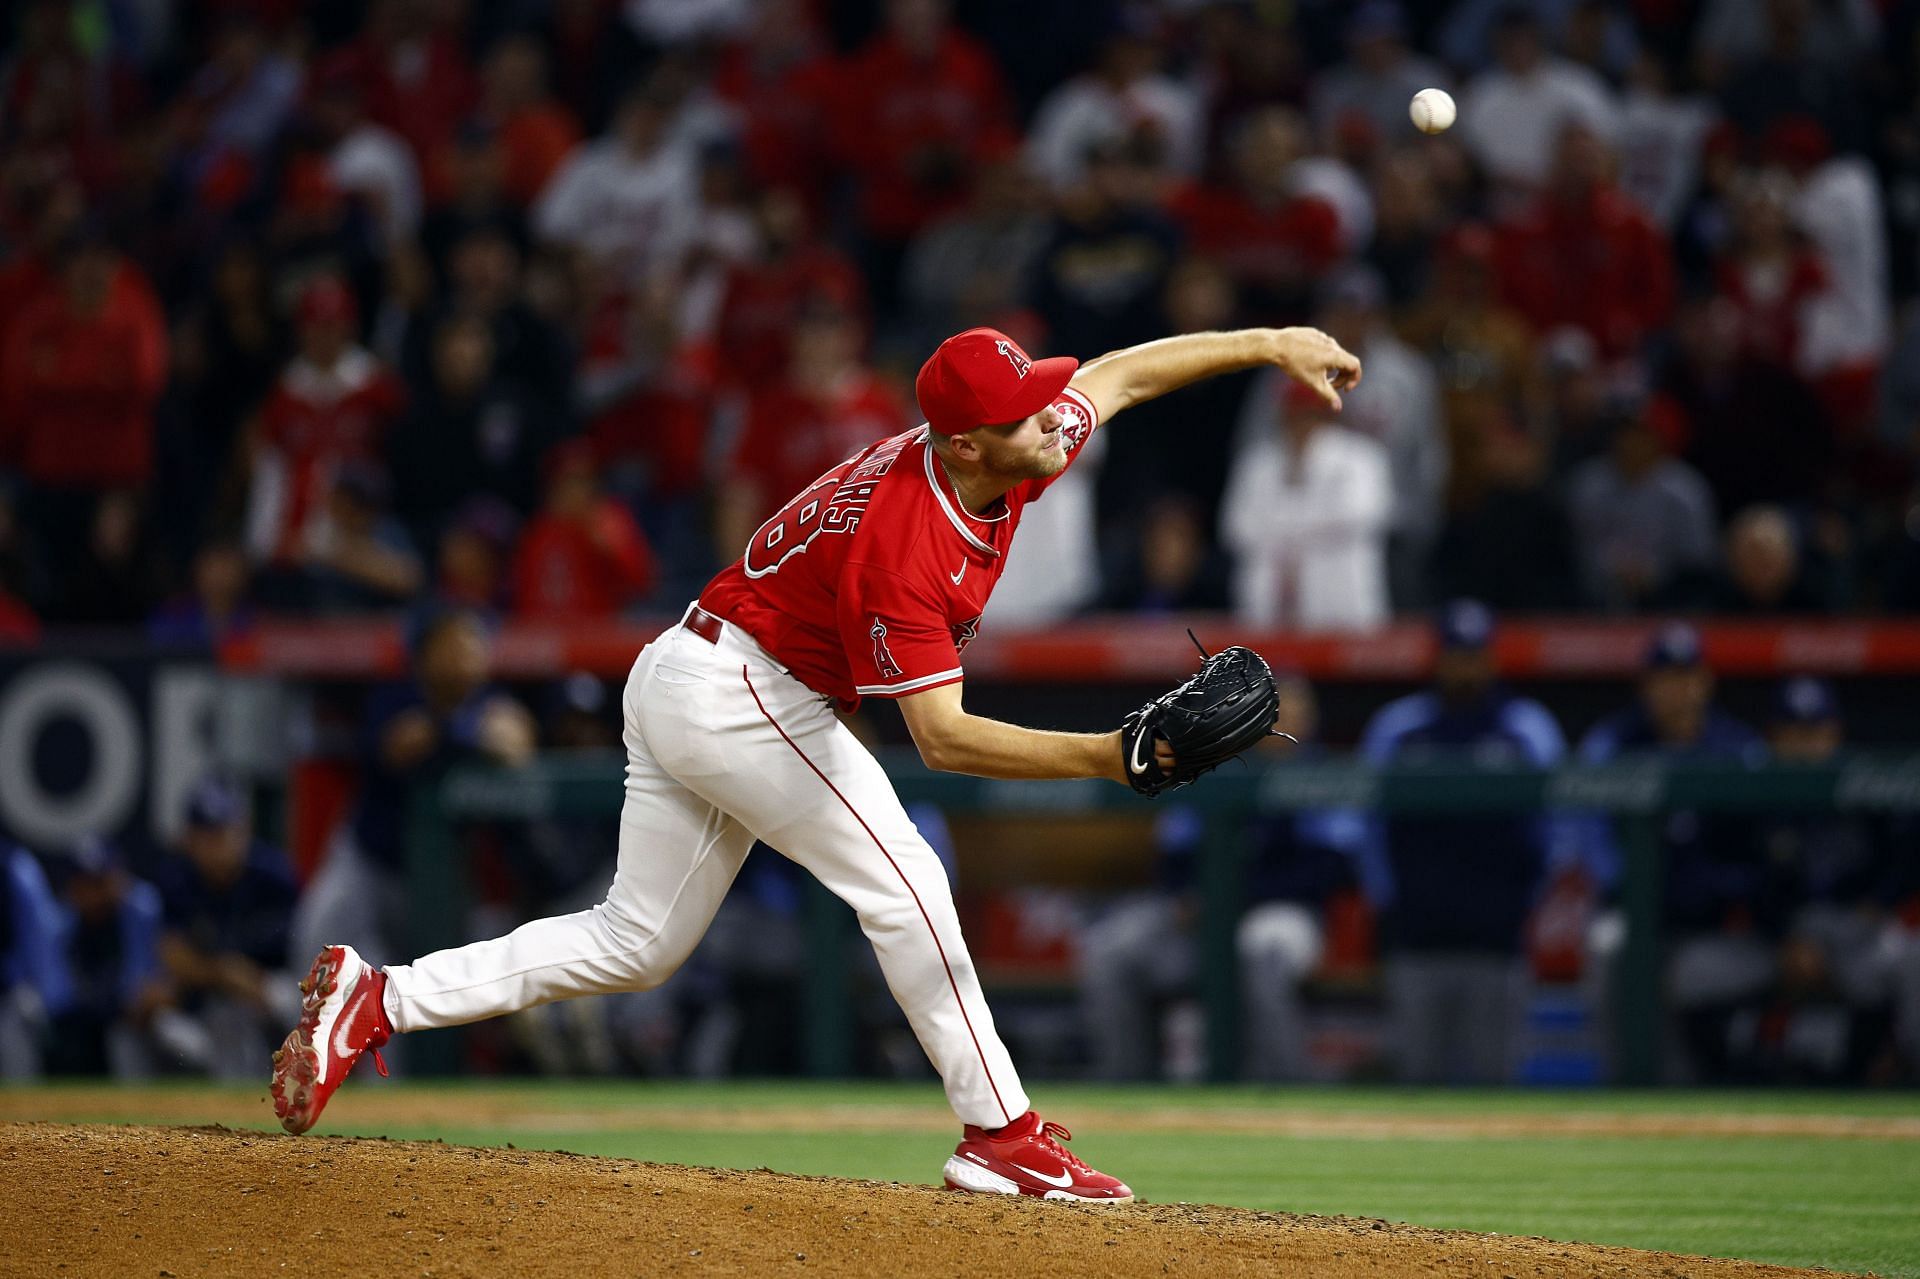 Angels young ace Detmers pitched a no-hitter against the Tampa Bay Rays at Angels Stadium on Tuesday night.